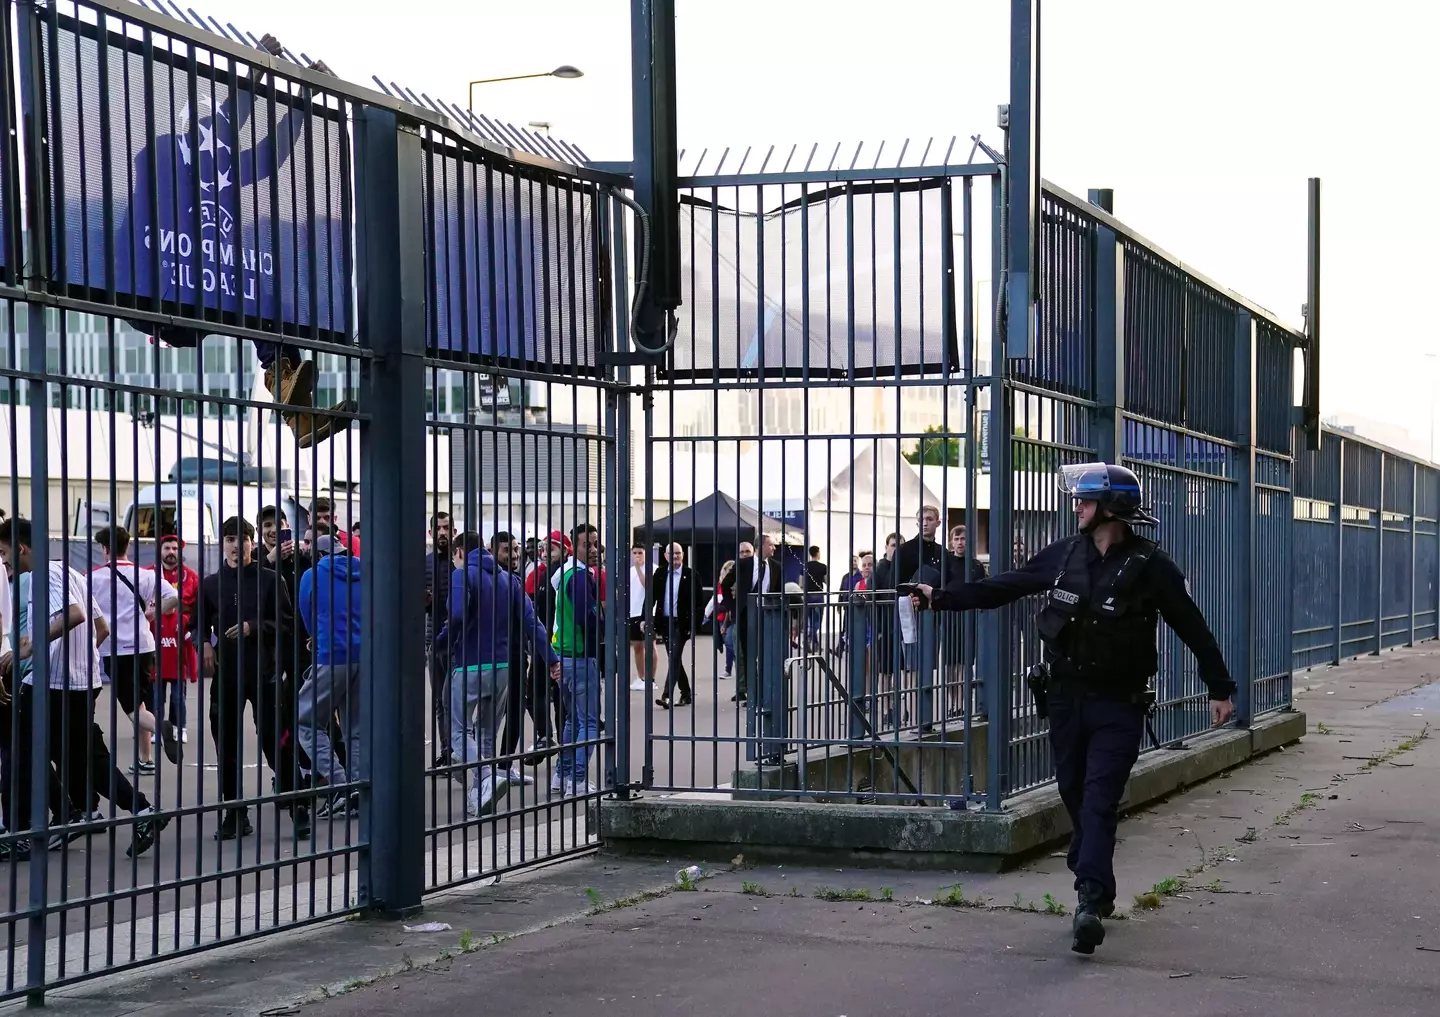 A police officer using pepper spray outside the stadium. (Image